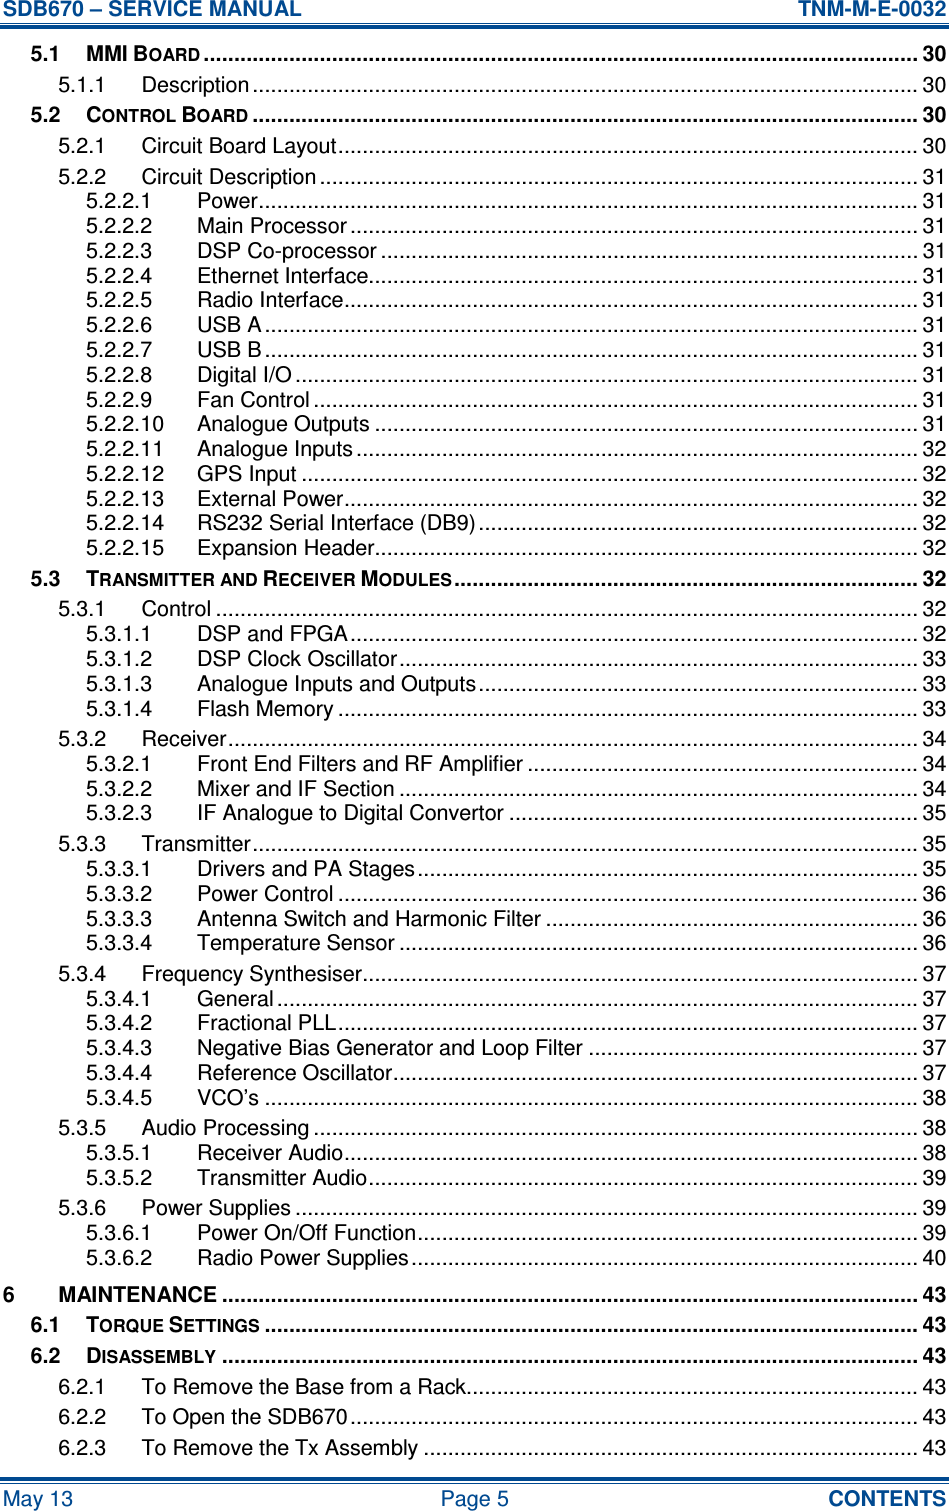 SDB670 – SERVICE MANUAL  TNM-M-E-0032 May 13  Page 5  CONTENTS 5.1 MMI BOARD..................................................................................................................... 30 5.1.1 Description ............................................................................................................. 30 5.2 CONTROL BOARD............................................................................................................. 30 5.2.1 Circuit Board Layout............................................................................................... 30 5.2.2 Circuit Description .................................................................................................. 31 5.2.2.1 Power............................................................................................................ 31 5.2.2.2 Main Processor ............................................................................................. 31 5.2.2.3 DSP Co-processor ........................................................................................ 31 5.2.2.4 Ethernet Interface.......................................................................................... 31 5.2.2.5 Radio Interface.............................................................................................. 31 5.2.2.6 USB A ........................................................................................................... 31 5.2.2.7 USB B ........................................................................................................... 31 5.2.2.8 Digital I/O ...................................................................................................... 31 5.2.2.9 Fan Control ................................................................................................... 31 5.2.2.10 Analogue Outputs ......................................................................................... 31 5.2.2.11 Analogue Inputs ............................................................................................ 32 5.2.2.12 GPS Input ..................................................................................................... 32 5.2.2.13 External Power.............................................................................................. 32 5.2.2.14 RS232 Serial Interface (DB9) ........................................................................ 32 5.2.2.15 Expansion Header......................................................................................... 32 5.3 TRANSMITTER AND RECEIVER MODULES............................................................................ 32 5.3.1 Control ................................................................................................................... 32 5.3.1.1 DSP and FPGA............................................................................................. 32 5.3.1.2 DSP Clock Oscillator..................................................................................... 33 5.3.1.3 Analogue Inputs and Outputs........................................................................ 33 5.3.1.4 Flash Memory ............................................................................................... 33 5.3.2 Receiver................................................................................................................. 34 5.3.2.1 Front End Filters and RF Amplifier ................................................................ 34 5.3.2.2 Mixer and IF Section ..................................................................................... 34 5.3.2.3 IF Analogue to Digital Convertor ................................................................... 35 5.3.3 Transmitter............................................................................................................. 35 5.3.3.1 Drivers and PA Stages.................................................................................. 35 5.3.3.2 Power Control ............................................................................................... 36 5.3.3.3 Antenna Switch and Harmonic Filter ............................................................. 36 5.3.3.4 Temperature Sensor ..................................................................................... 36 5.3.4 Frequency Synthesiser........................................................................................... 37 5.3.4.1 General ......................................................................................................... 37 5.3.4.2 Fractional PLL............................................................................................... 37 5.3.4.3 Negative Bias Generator and Loop Filter ...................................................... 37 5.3.4.4 Reference Oscillator...................................................................................... 37 5.3.4.5 VCO’s ........................................................................................................... 38 5.3.5 Audio Processing ................................................................................................... 38 5.3.5.1 Receiver Audio.............................................................................................. 38 5.3.5.2 Transmitter Audio.......................................................................................... 39 5.3.6 Power Supplies ...................................................................................................... 39 5.3.6.1 Power On/Off Function.................................................................................. 39 5.3.6.2 Radio Power Supplies................................................................................... 40 6 MAINTENANCE .................................................................................................................. 43 6.1 TORQUE SETTINGS........................................................................................................... 43 6.2 DISASSEMBLY.................................................................................................................. 43 6.2.1 To Remove the Base from a Rack.......................................................................... 43 6.2.2 To Open the SDB670............................................................................................. 43 6.2.3 To Remove the Tx Assembly ................................................................................. 43 